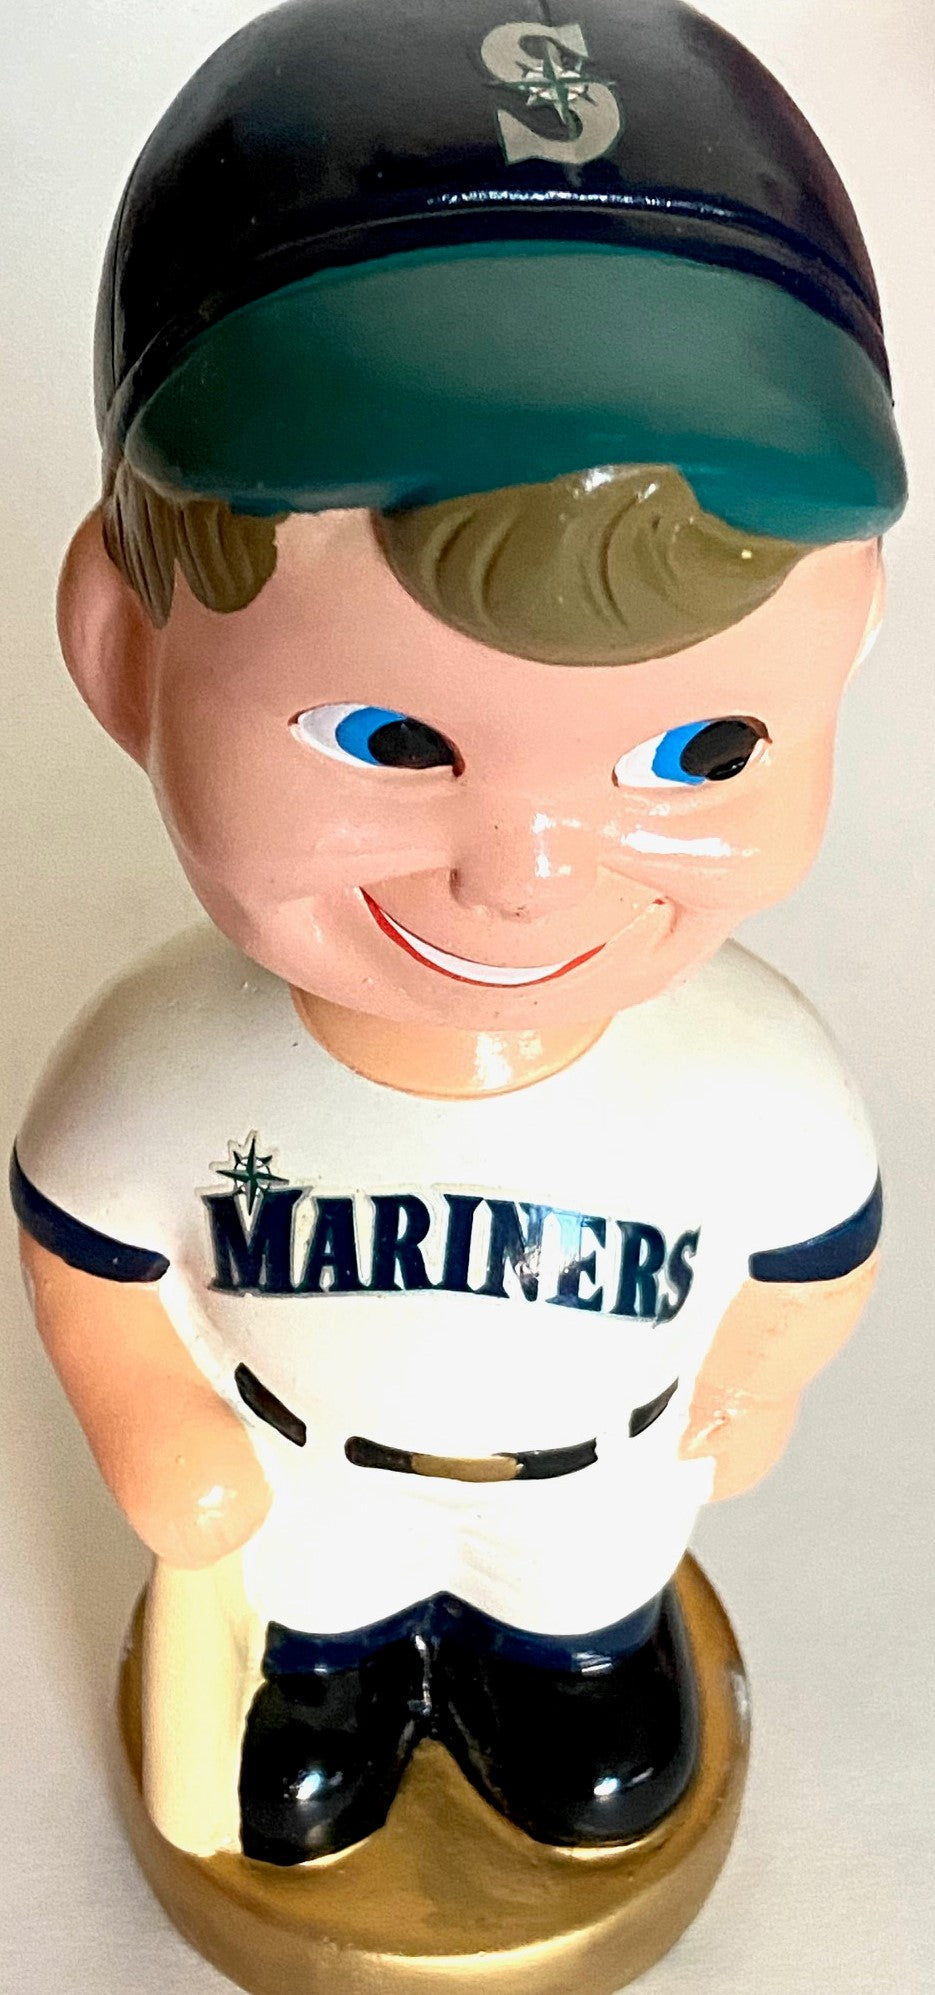 Seattle Mariners 2002 MLB "Boy" Bobblehead (New/Blemishes) by Twins Enterprise